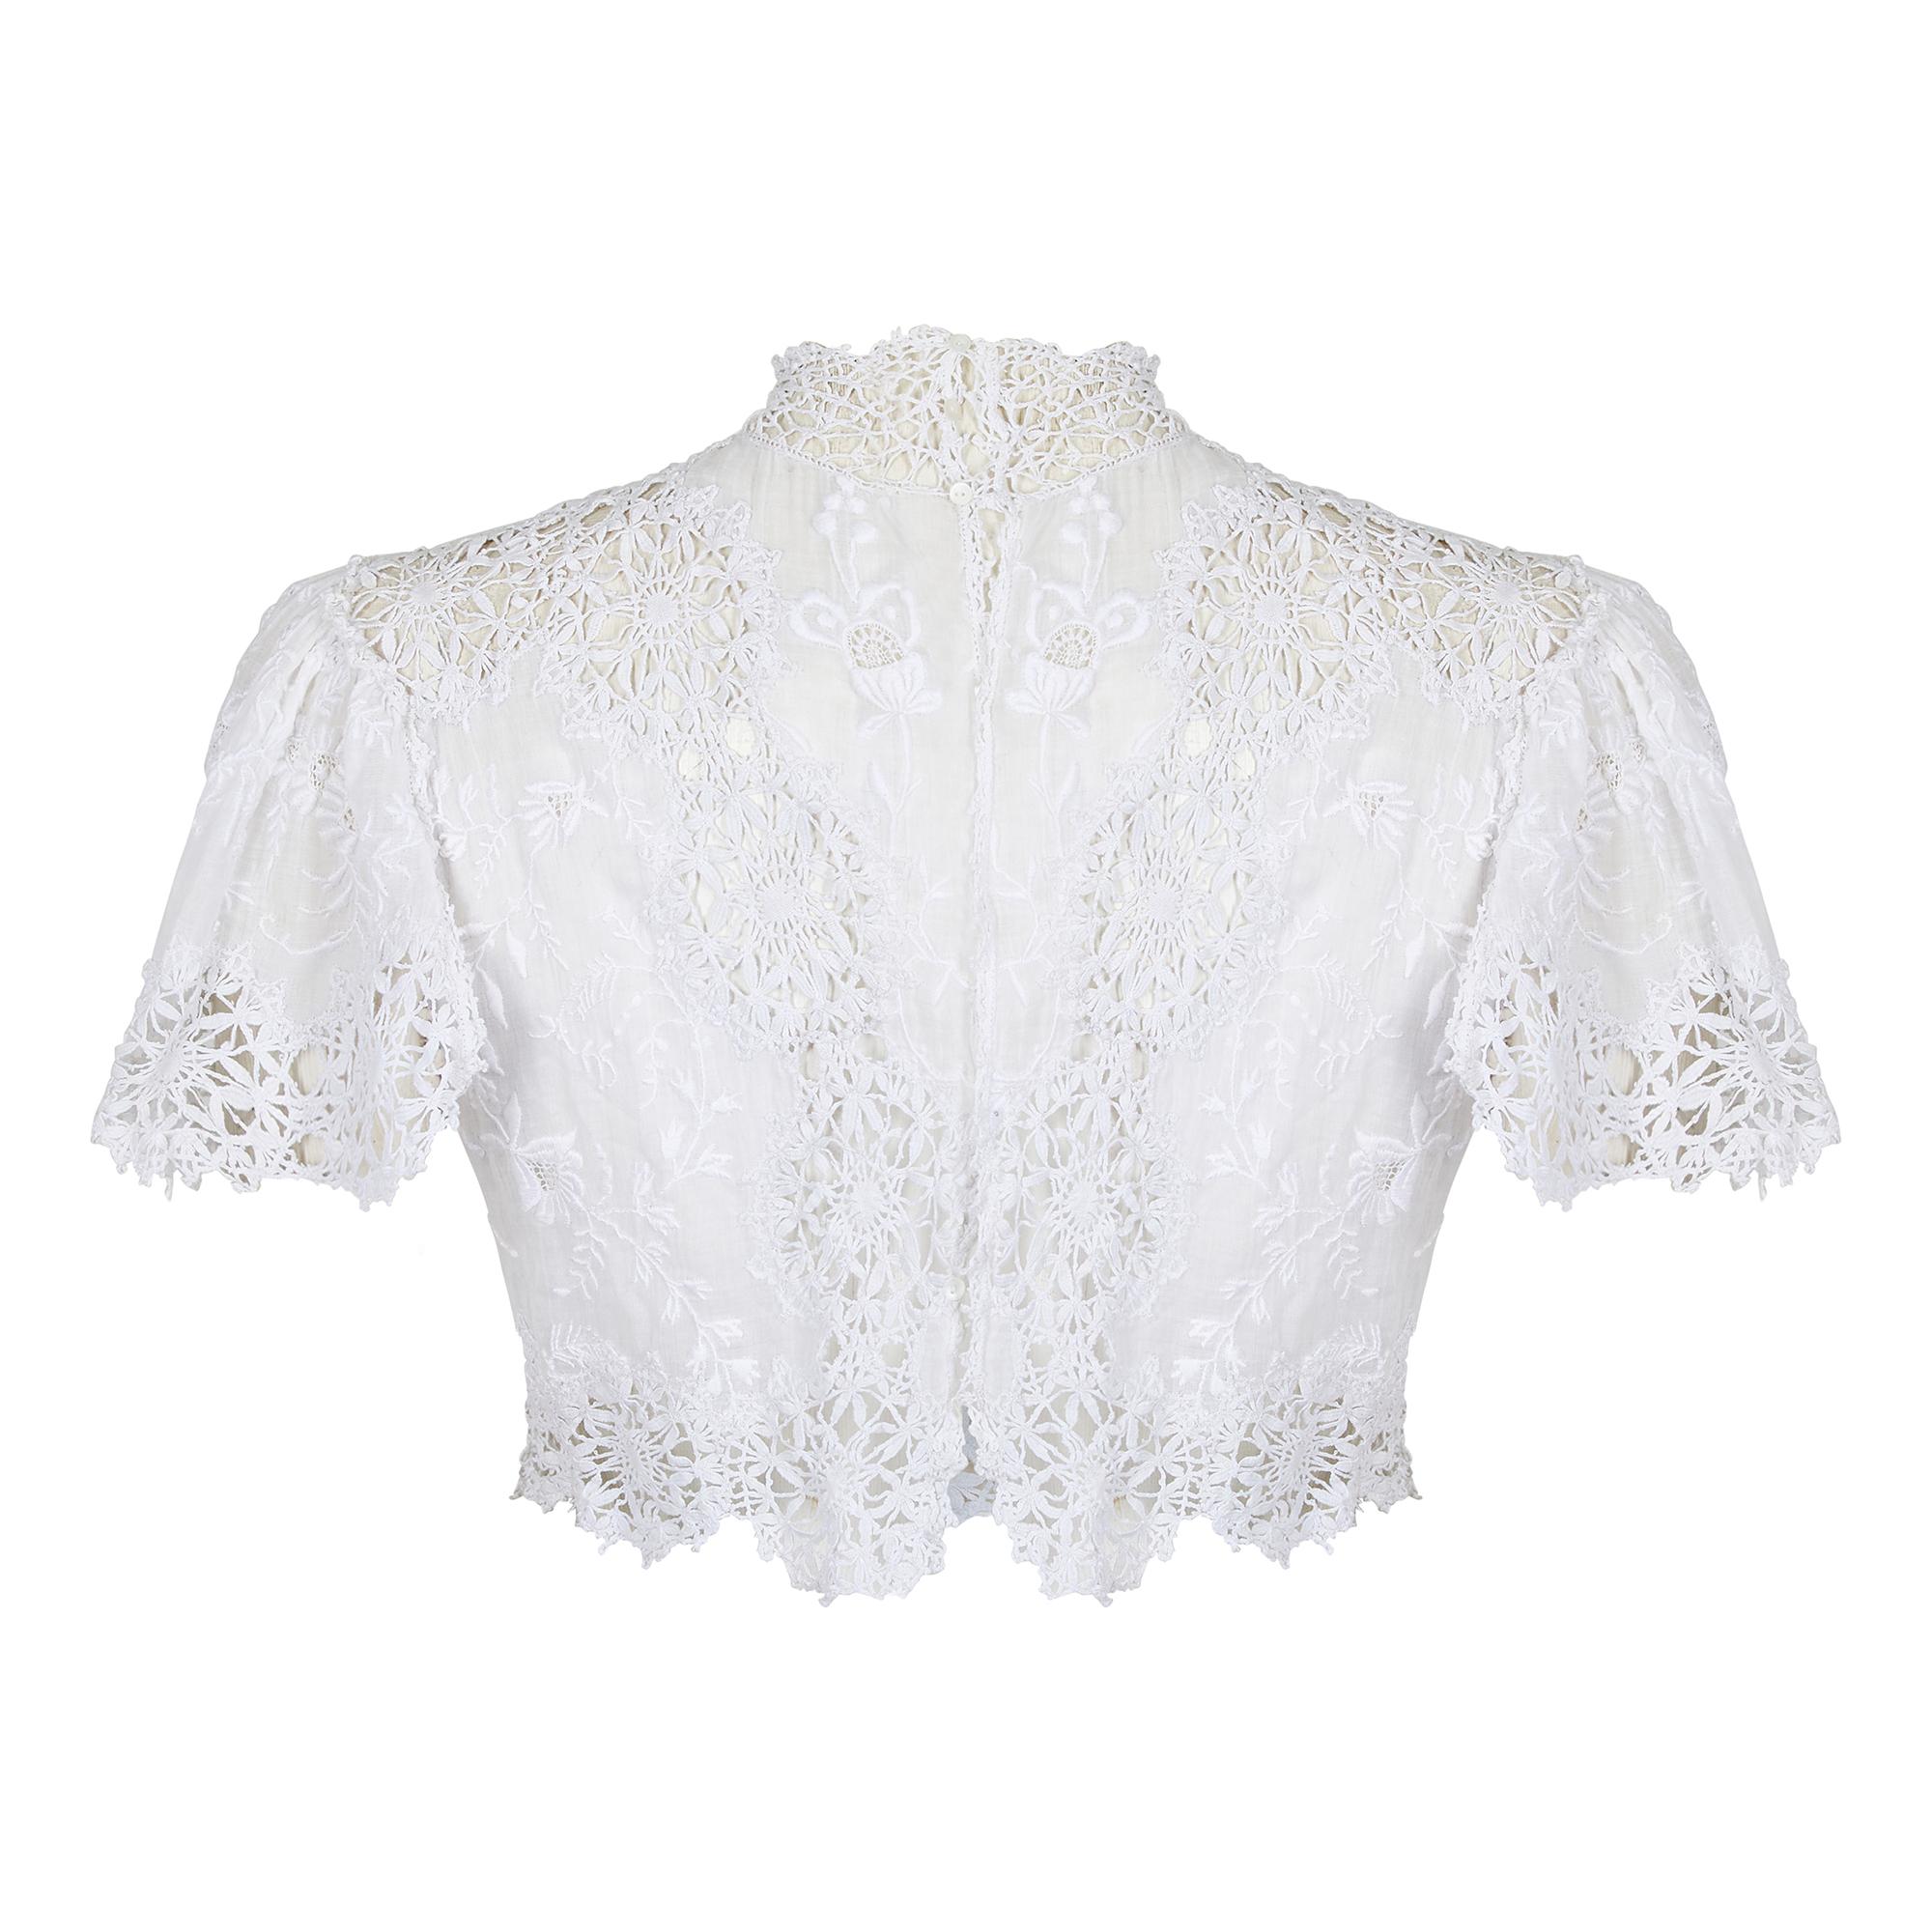 This is an exceptional antique Maltese lace, mousseline cotton and embroidered blouse in very fine antique condition. This versatile piece has a breath-taking amount of work involved in the construction, which is entirely handmade and comprised of